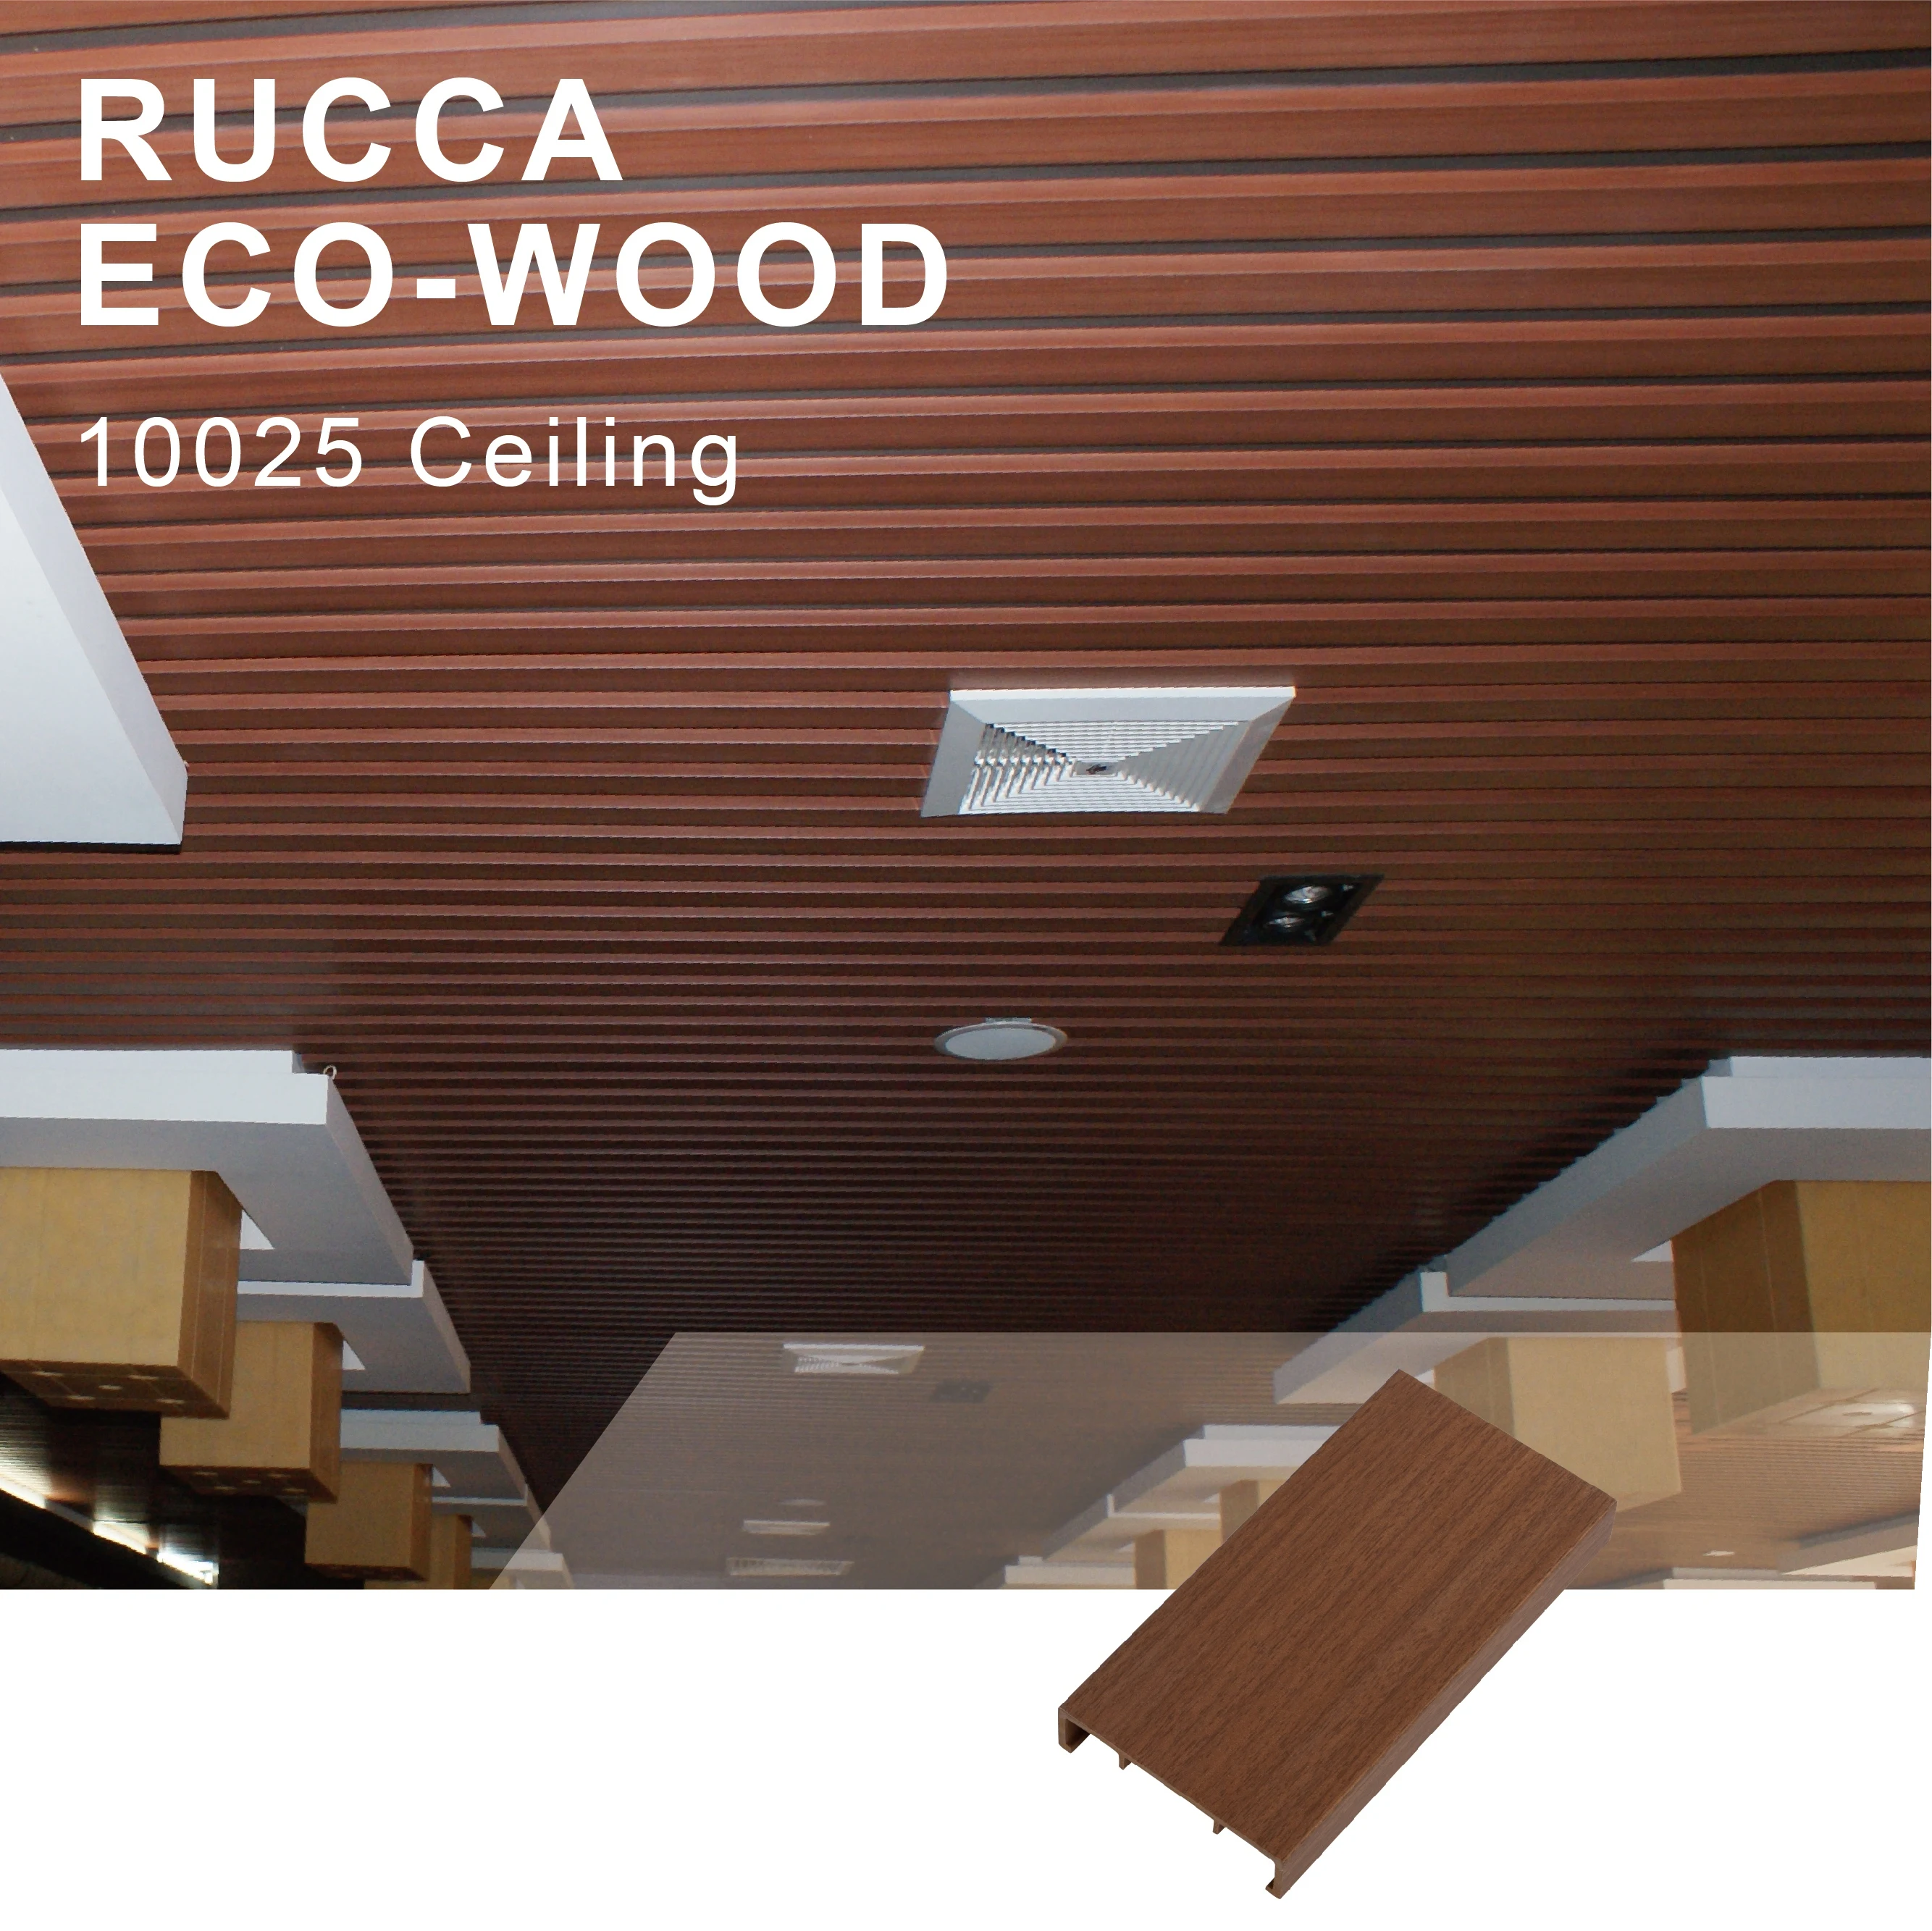 Rucca Ceiling Panel Wood Plastic Composite Pvc Ceiling Design For Homes Interior Decoration 100 25mm China Building Material Buy Pvc Ceiling